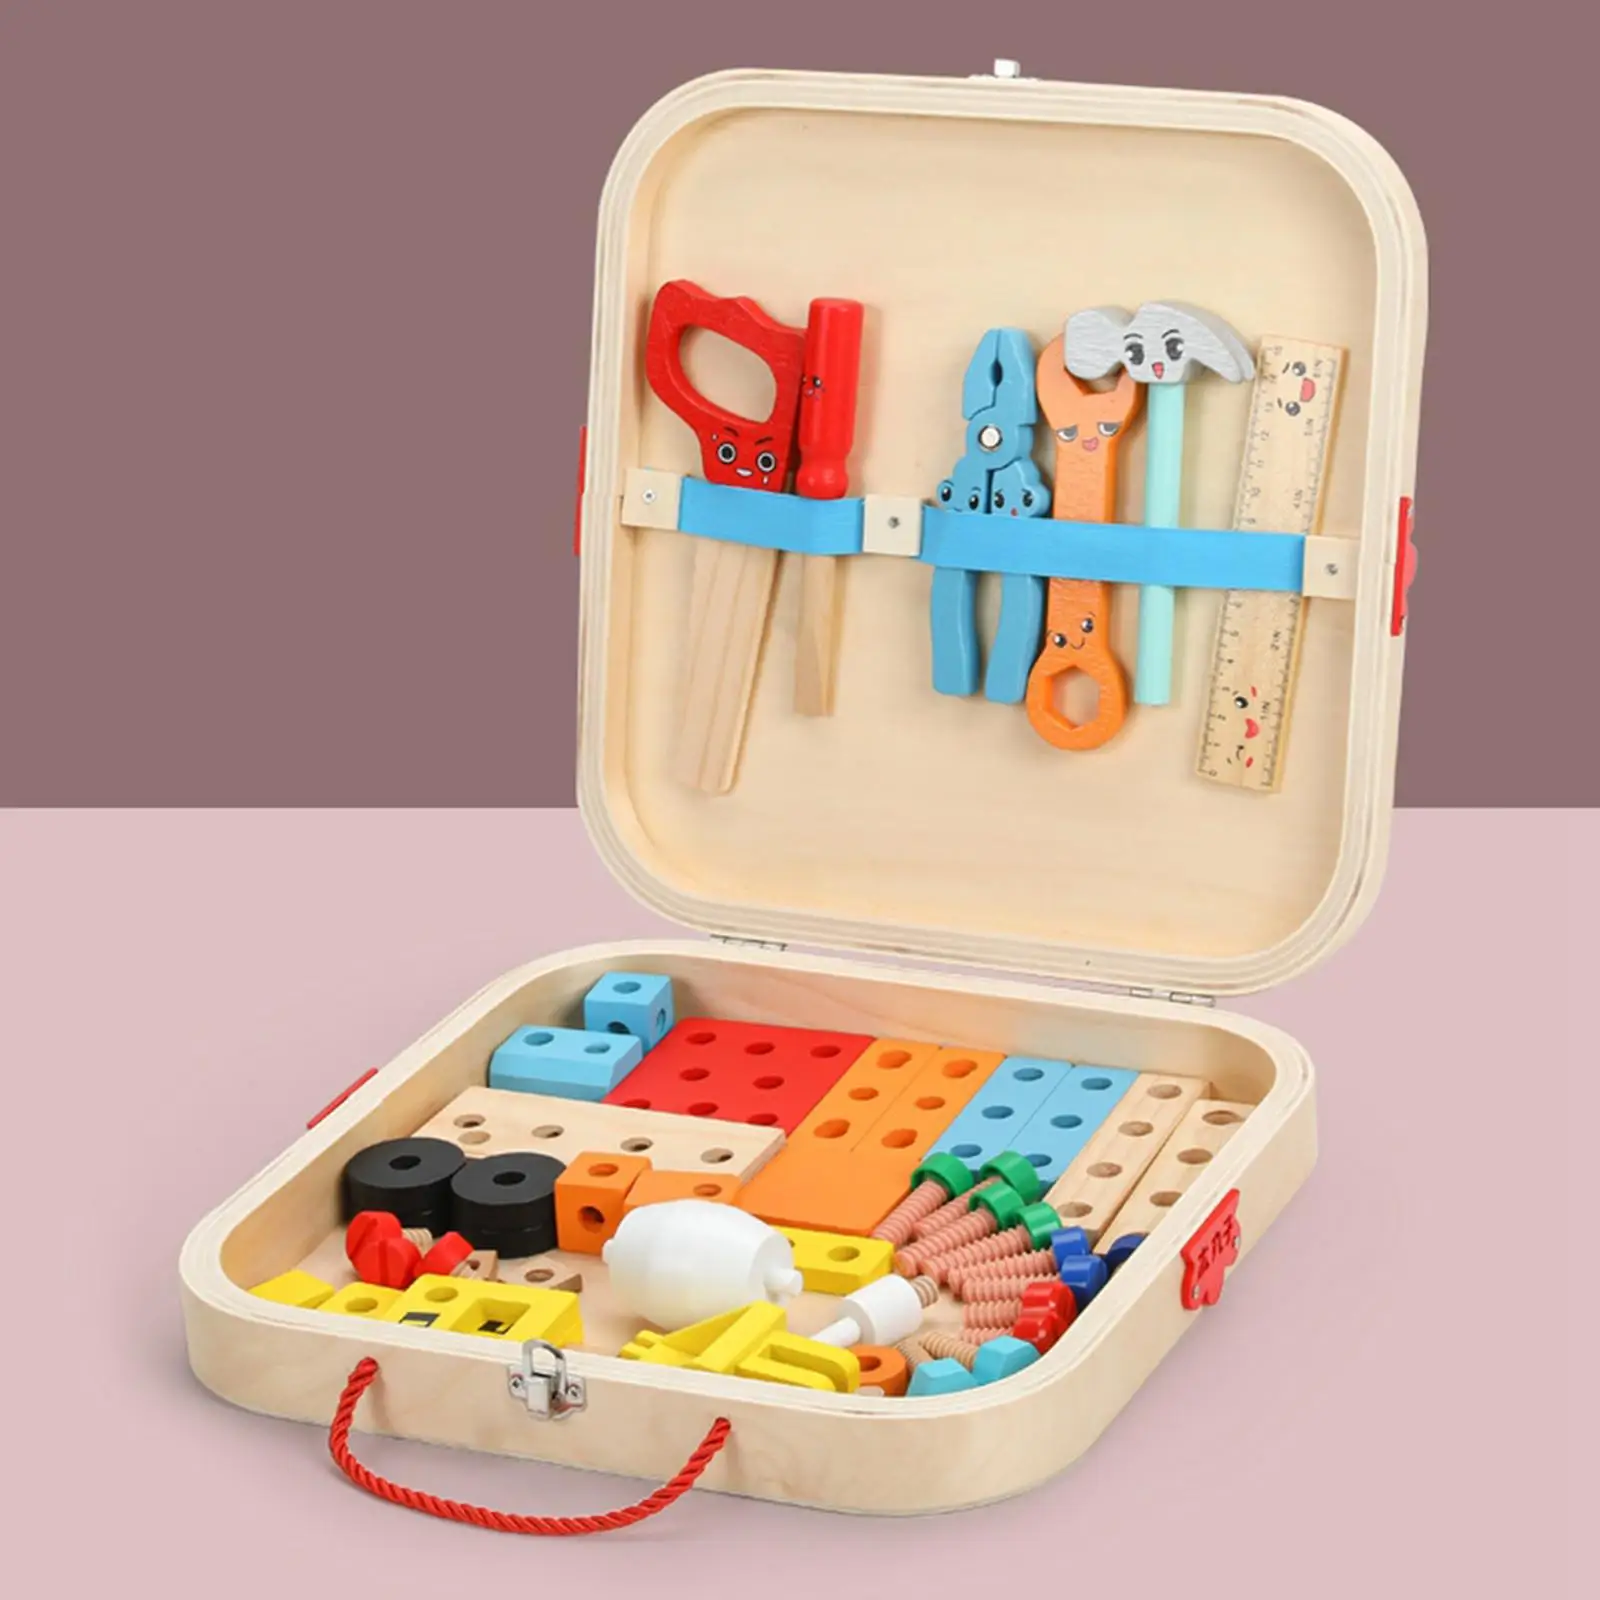 Wooden Kid Tool Set Smooth Wooden Toy Tool Box for Living Room Bedroom DIY